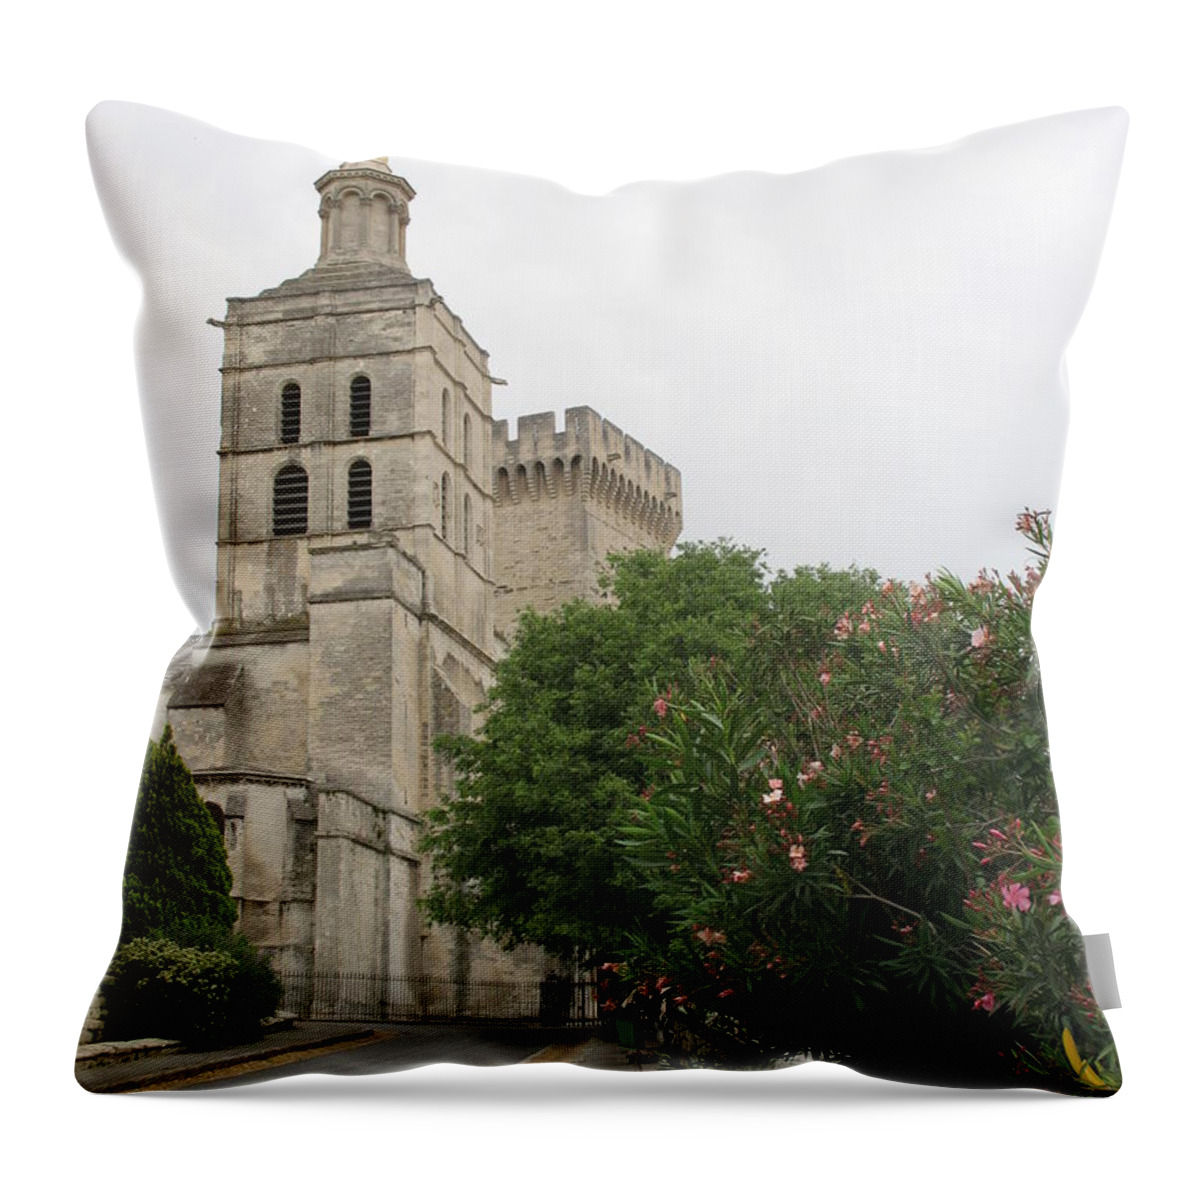 Palace Throw Pillow featuring the photograph Palace Of The Pope - Avignon by Christiane Schulze Art And Photography